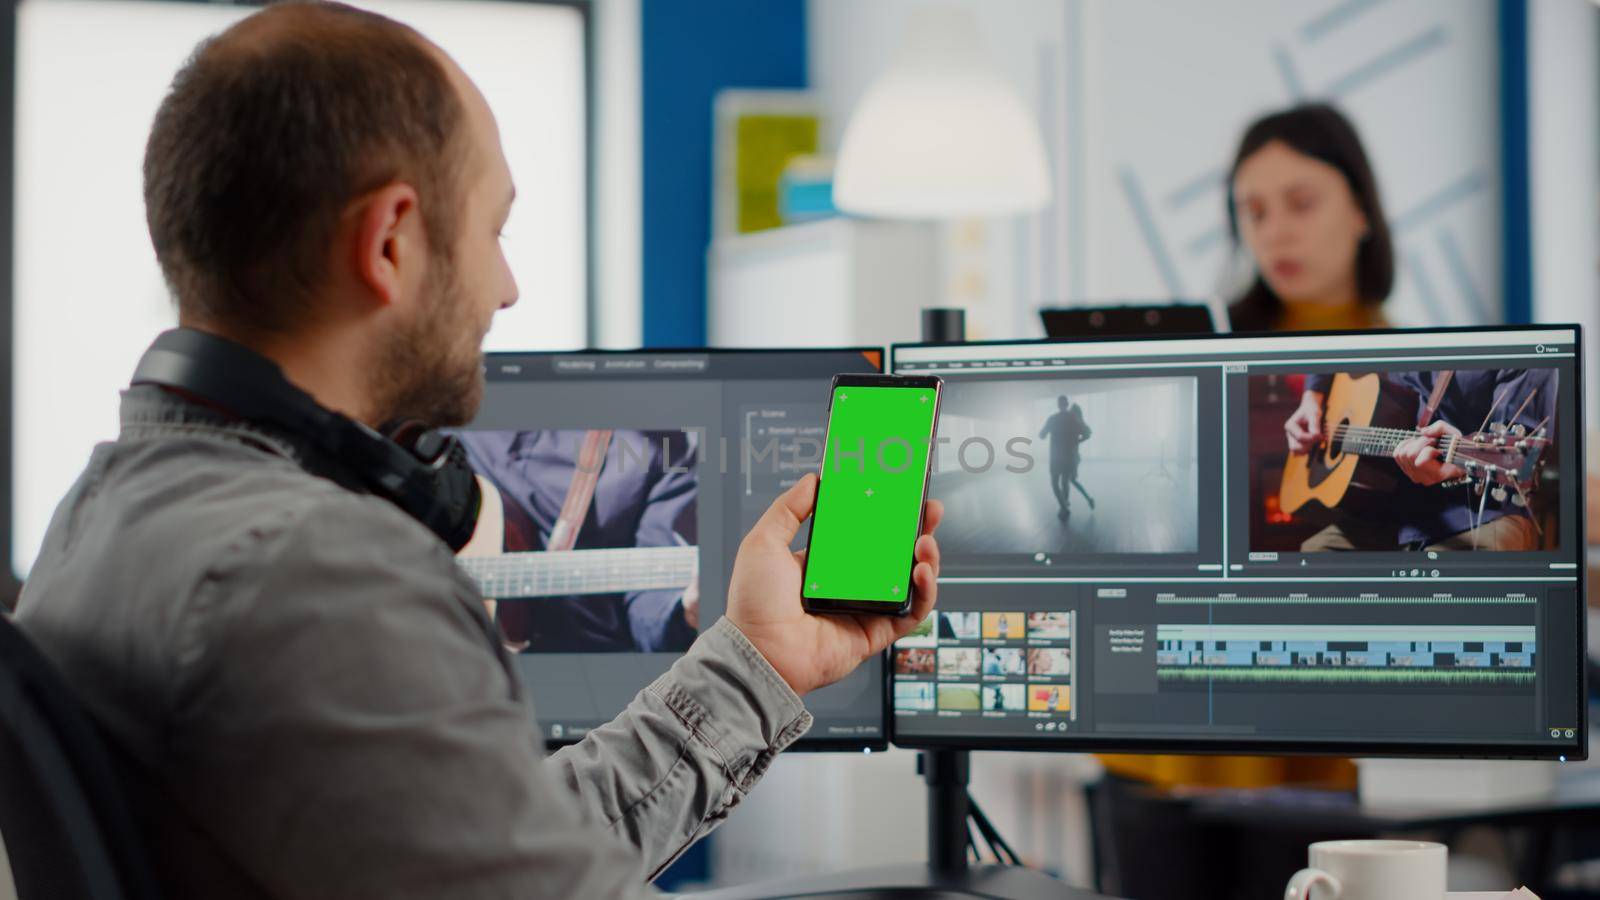 Video editor talking on video call holding smartphone with green screen, chroma key mock up isolated display taking break from retouching movie sitting in start up office. Team working in background